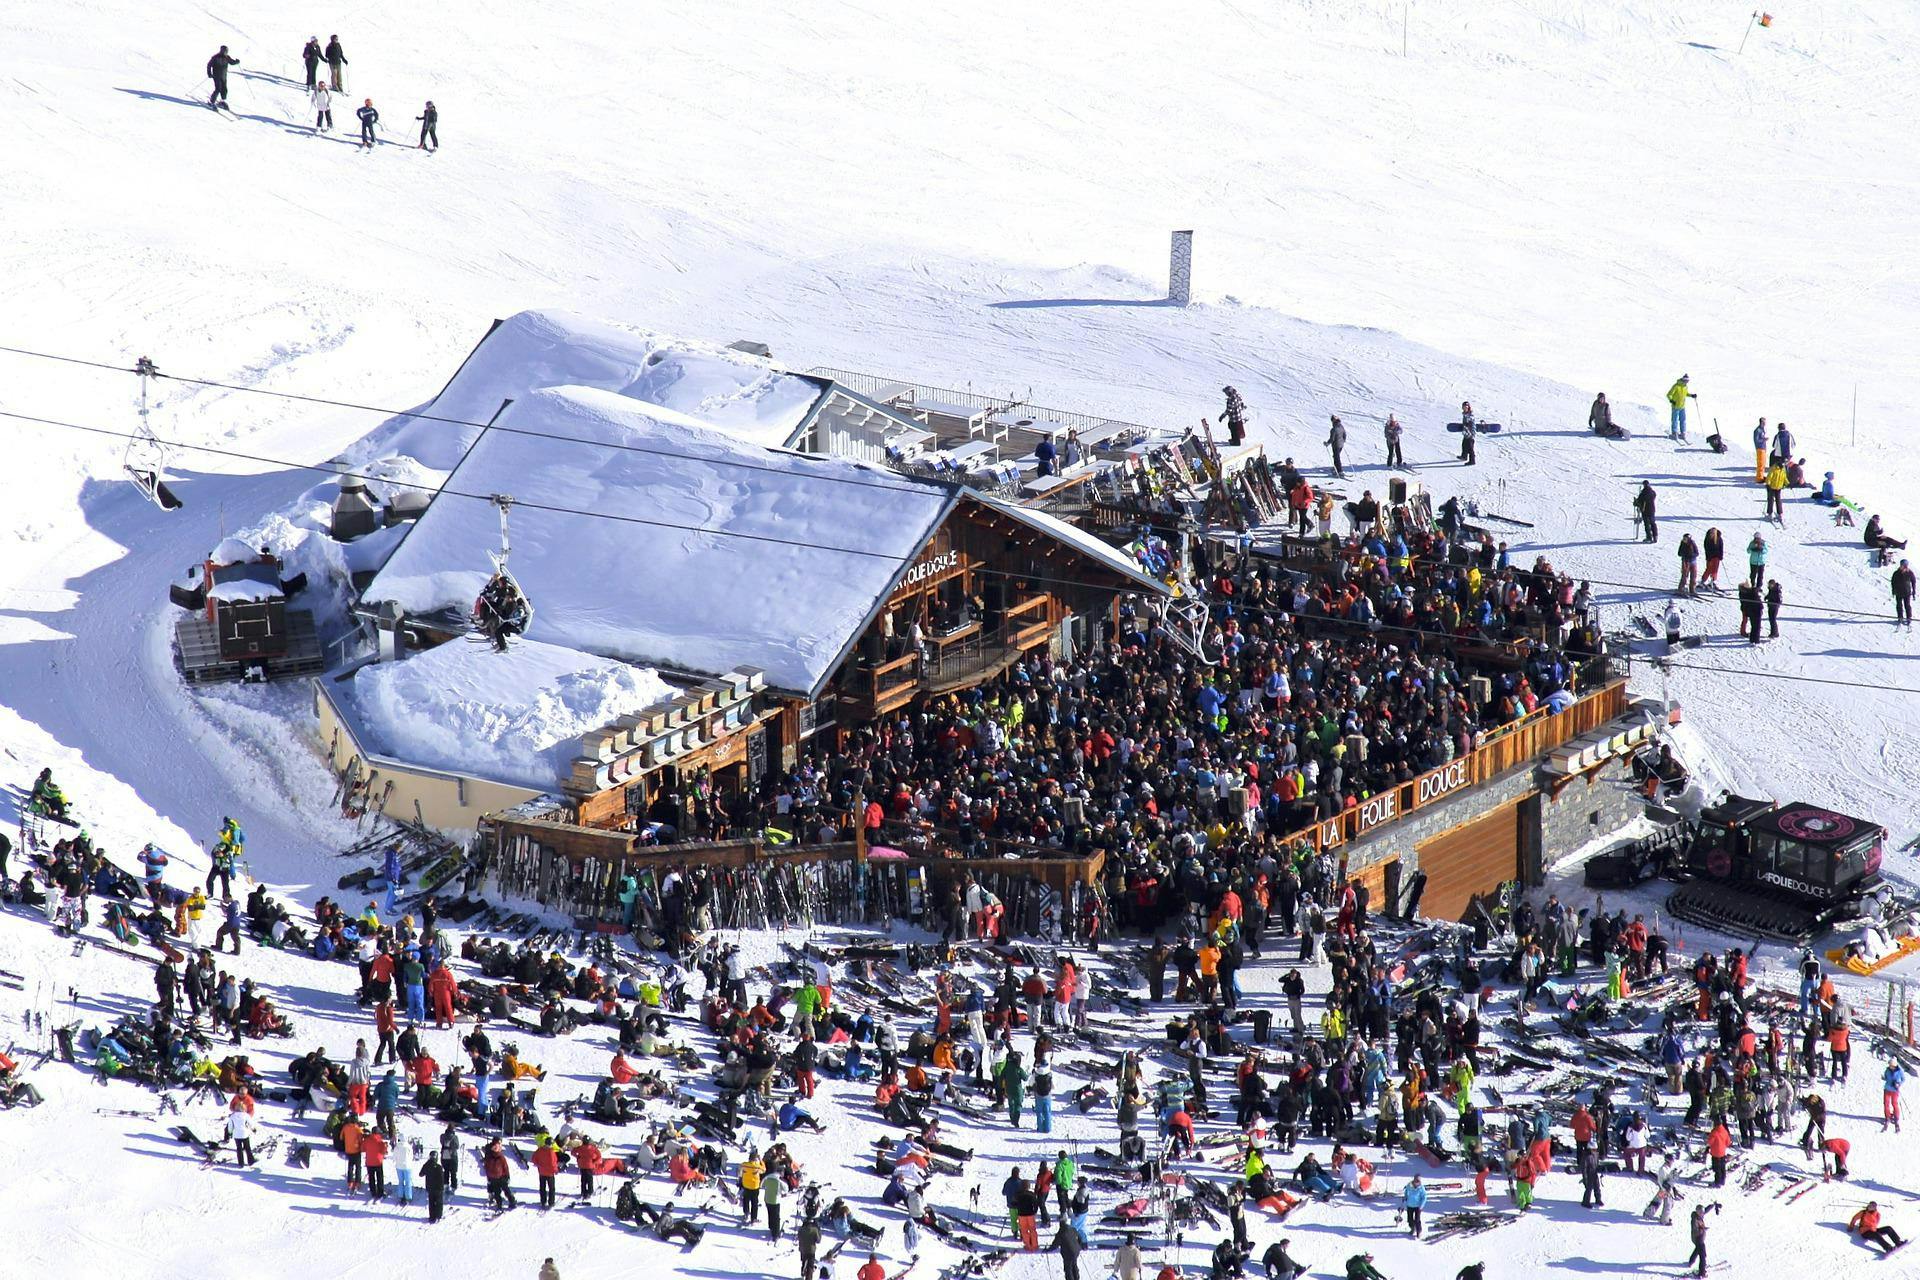 Val d'Isere, France